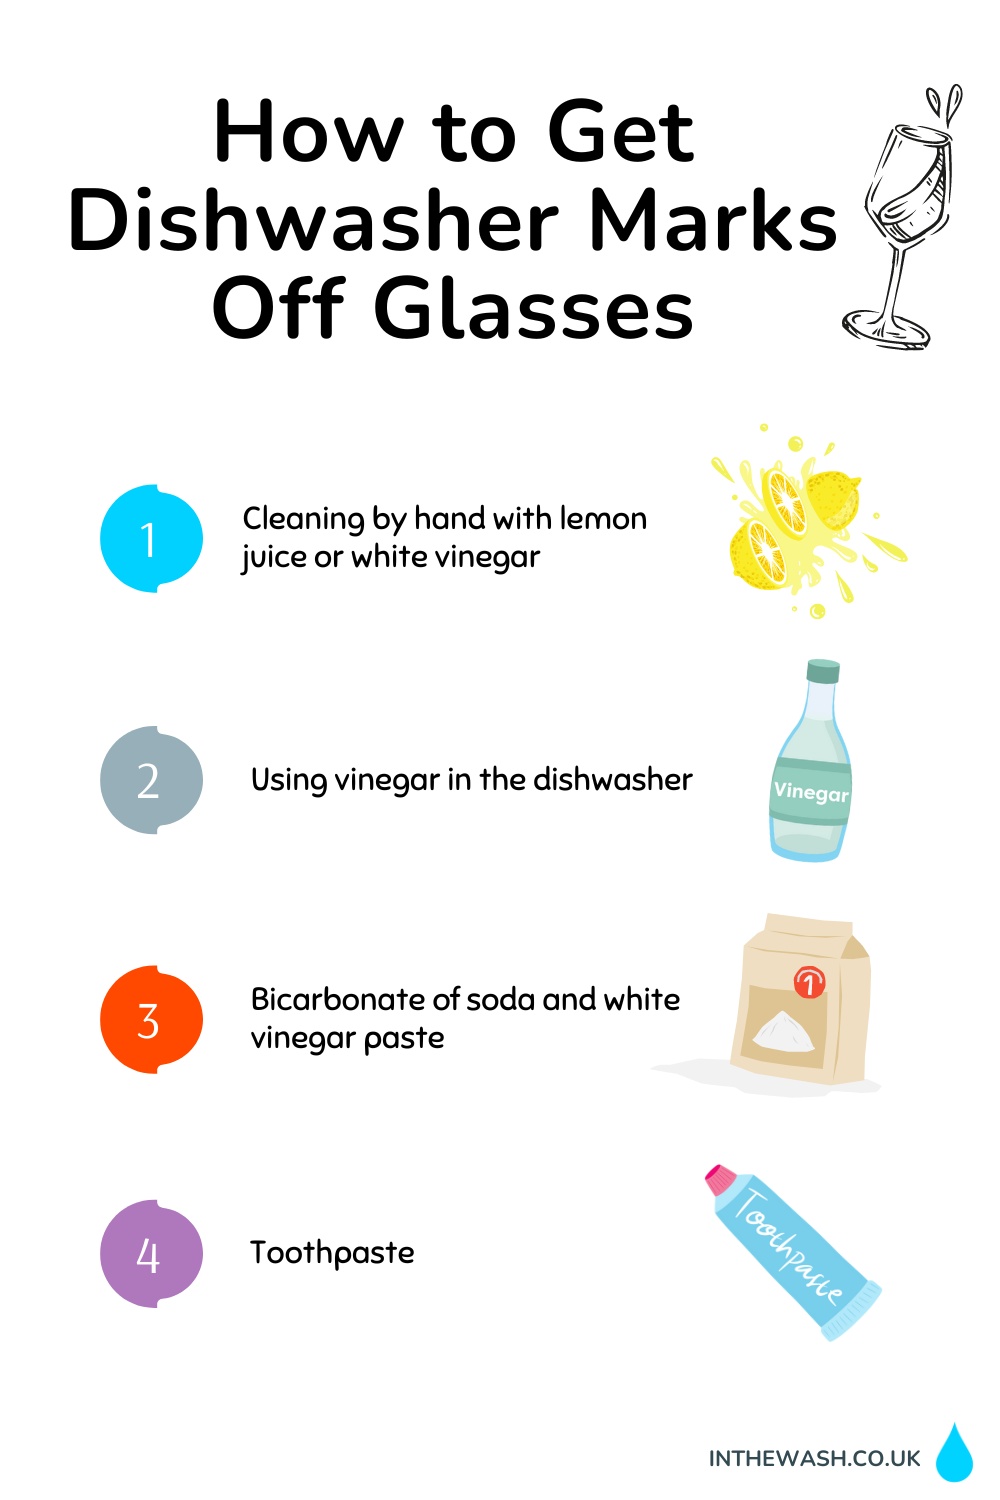 How to get dishwasher marks off glasses